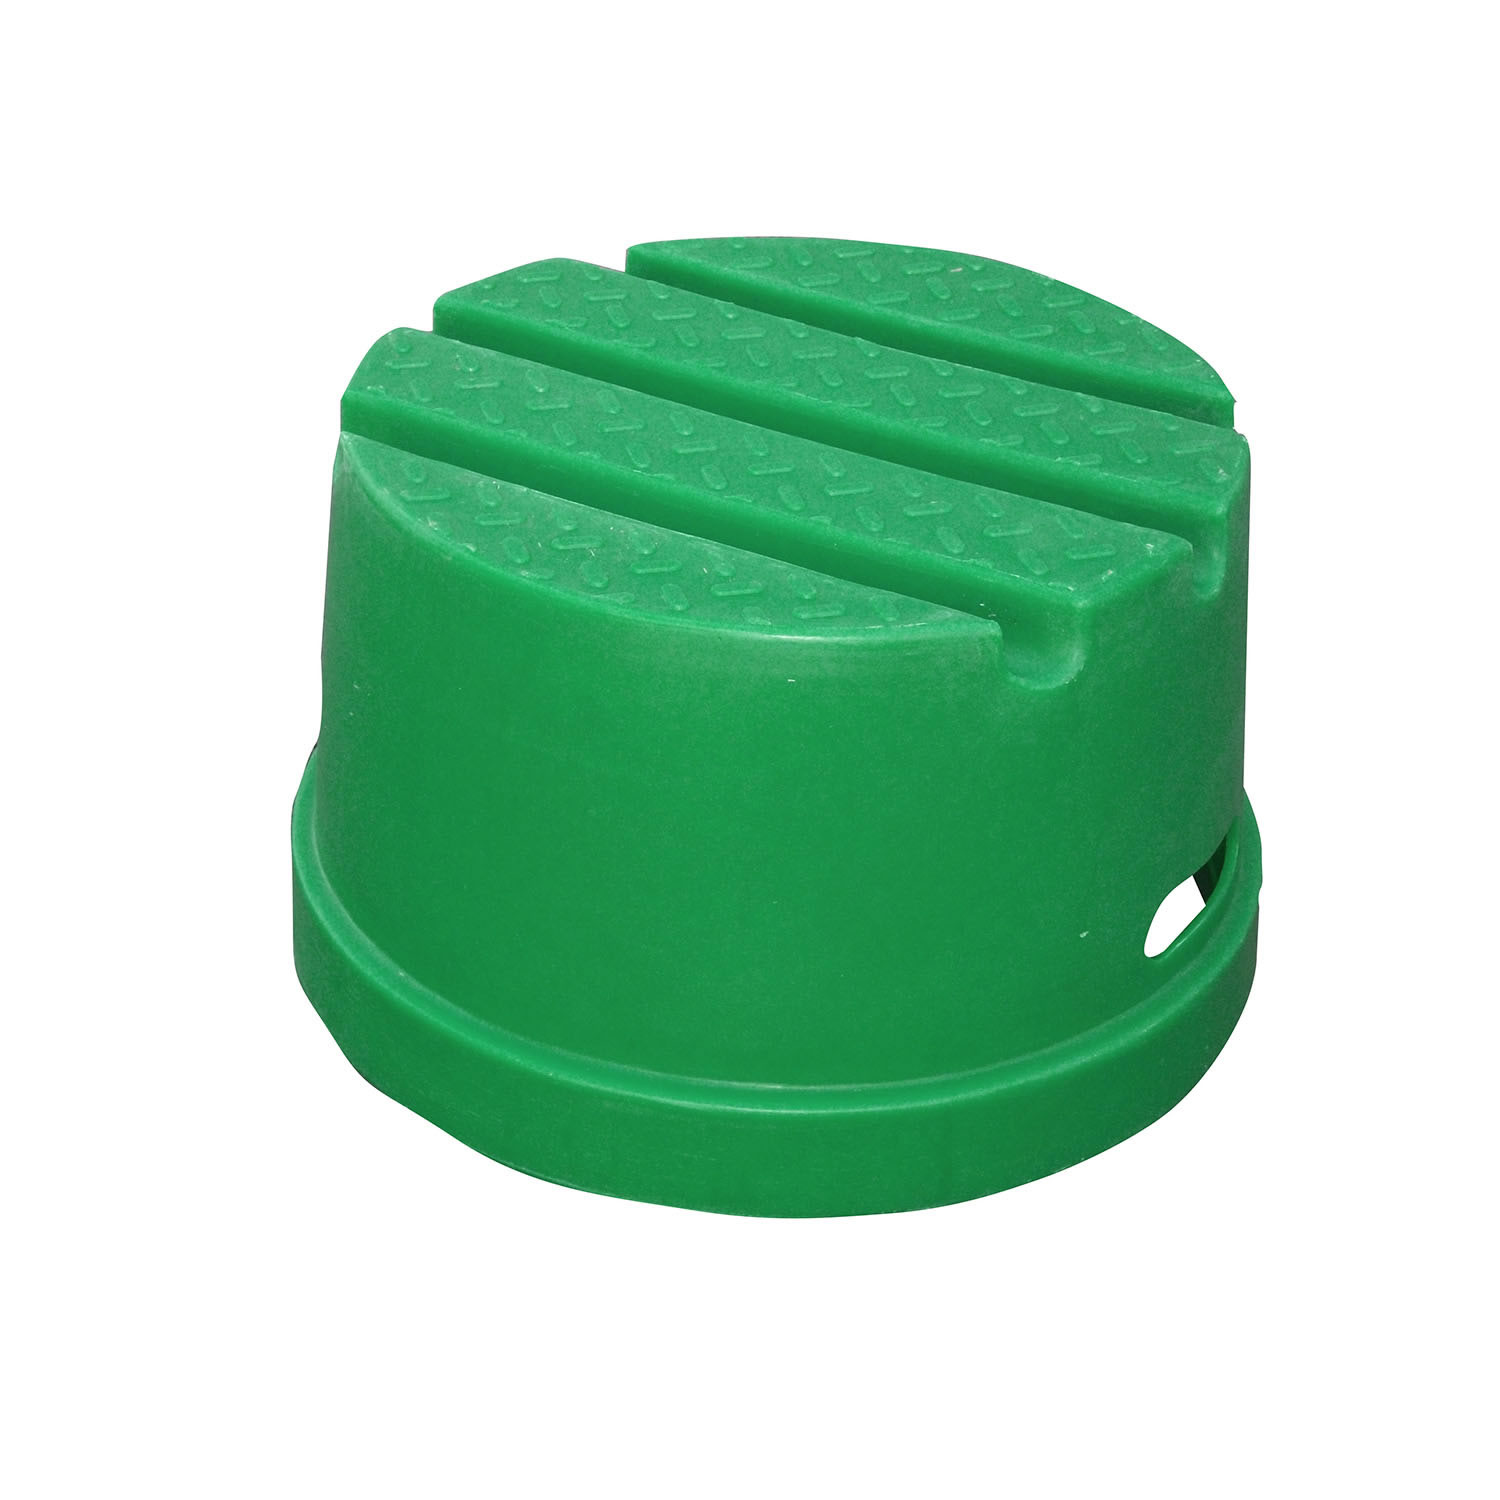 CLASSIC SHOWJUMPS STANDARD MOUNTING BLOCK ONE TREAD ROUND FOREST GREEN ONE TREAD STANDARD